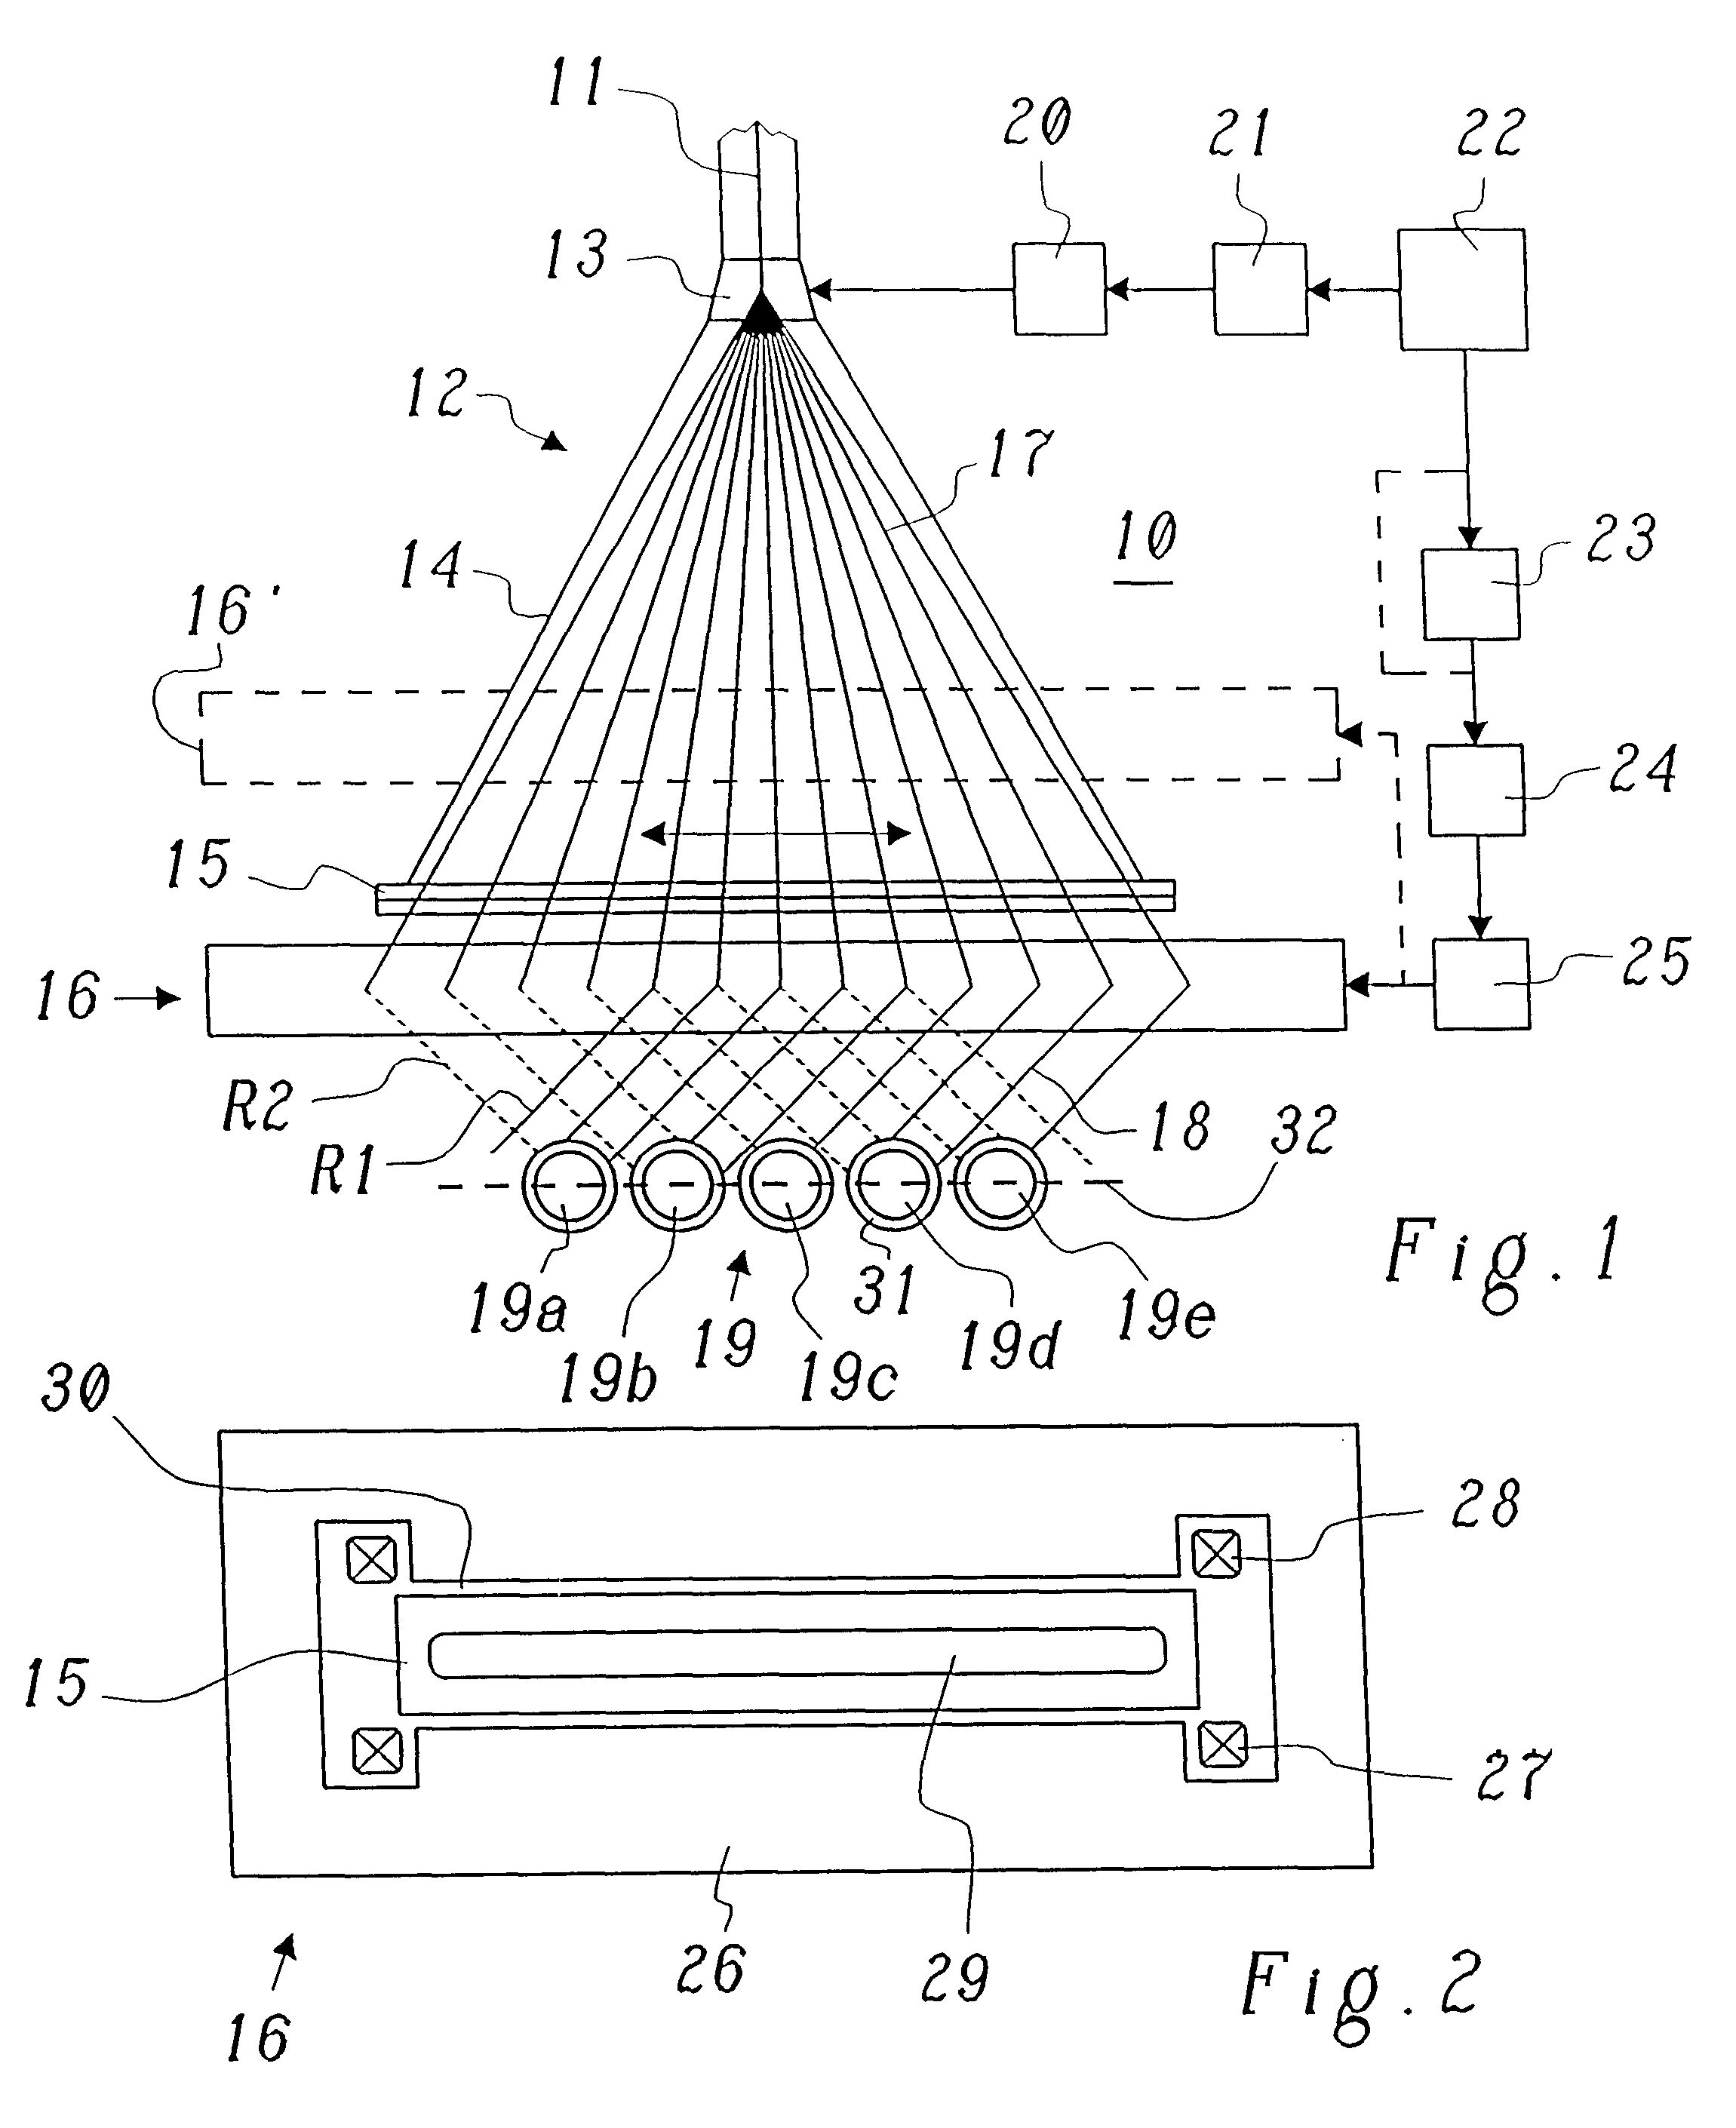 Process for the irradiation of strand-shaped irradiated material, and an irradiating device for the performance of the said process